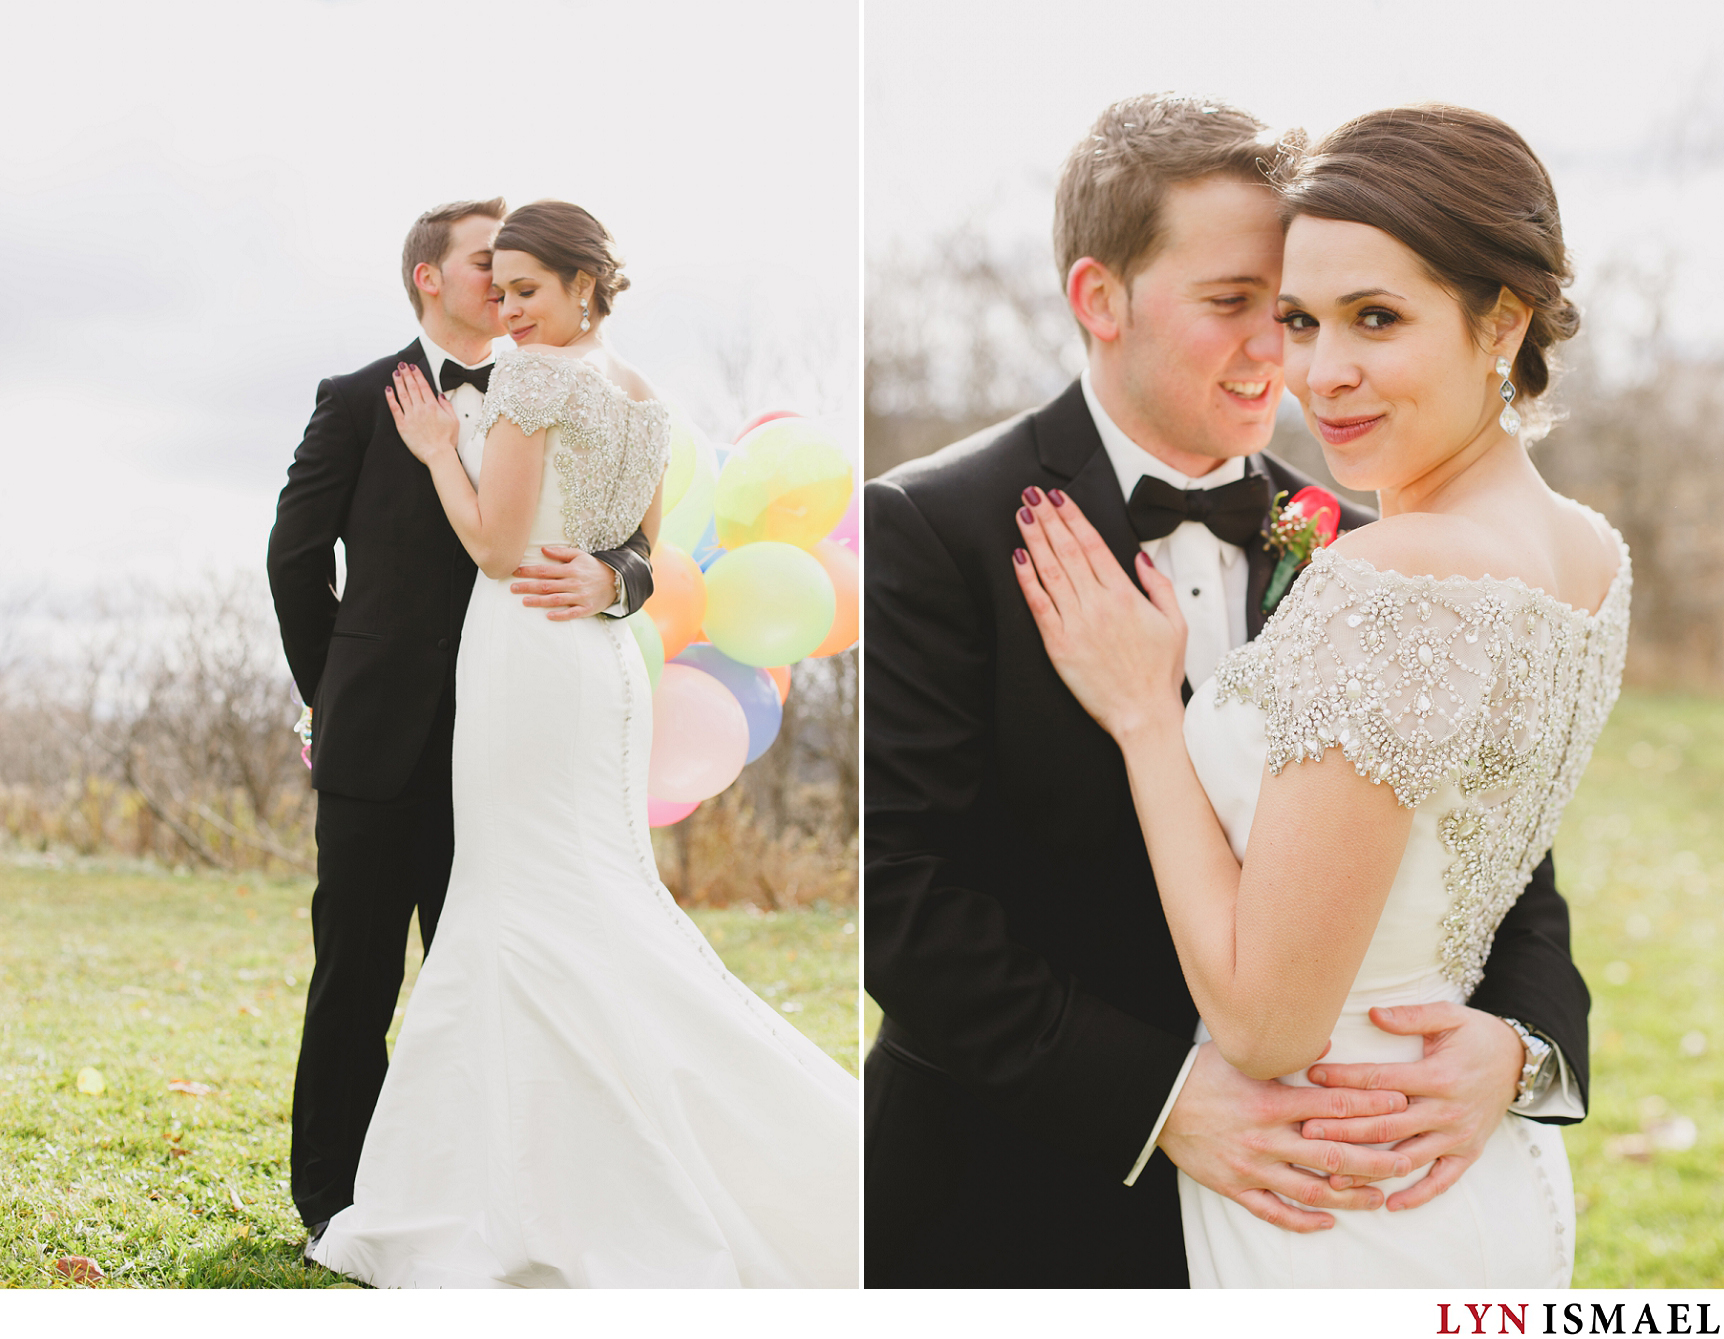 Romantic portraits of the bride and groom in Kitchener, Ontario.